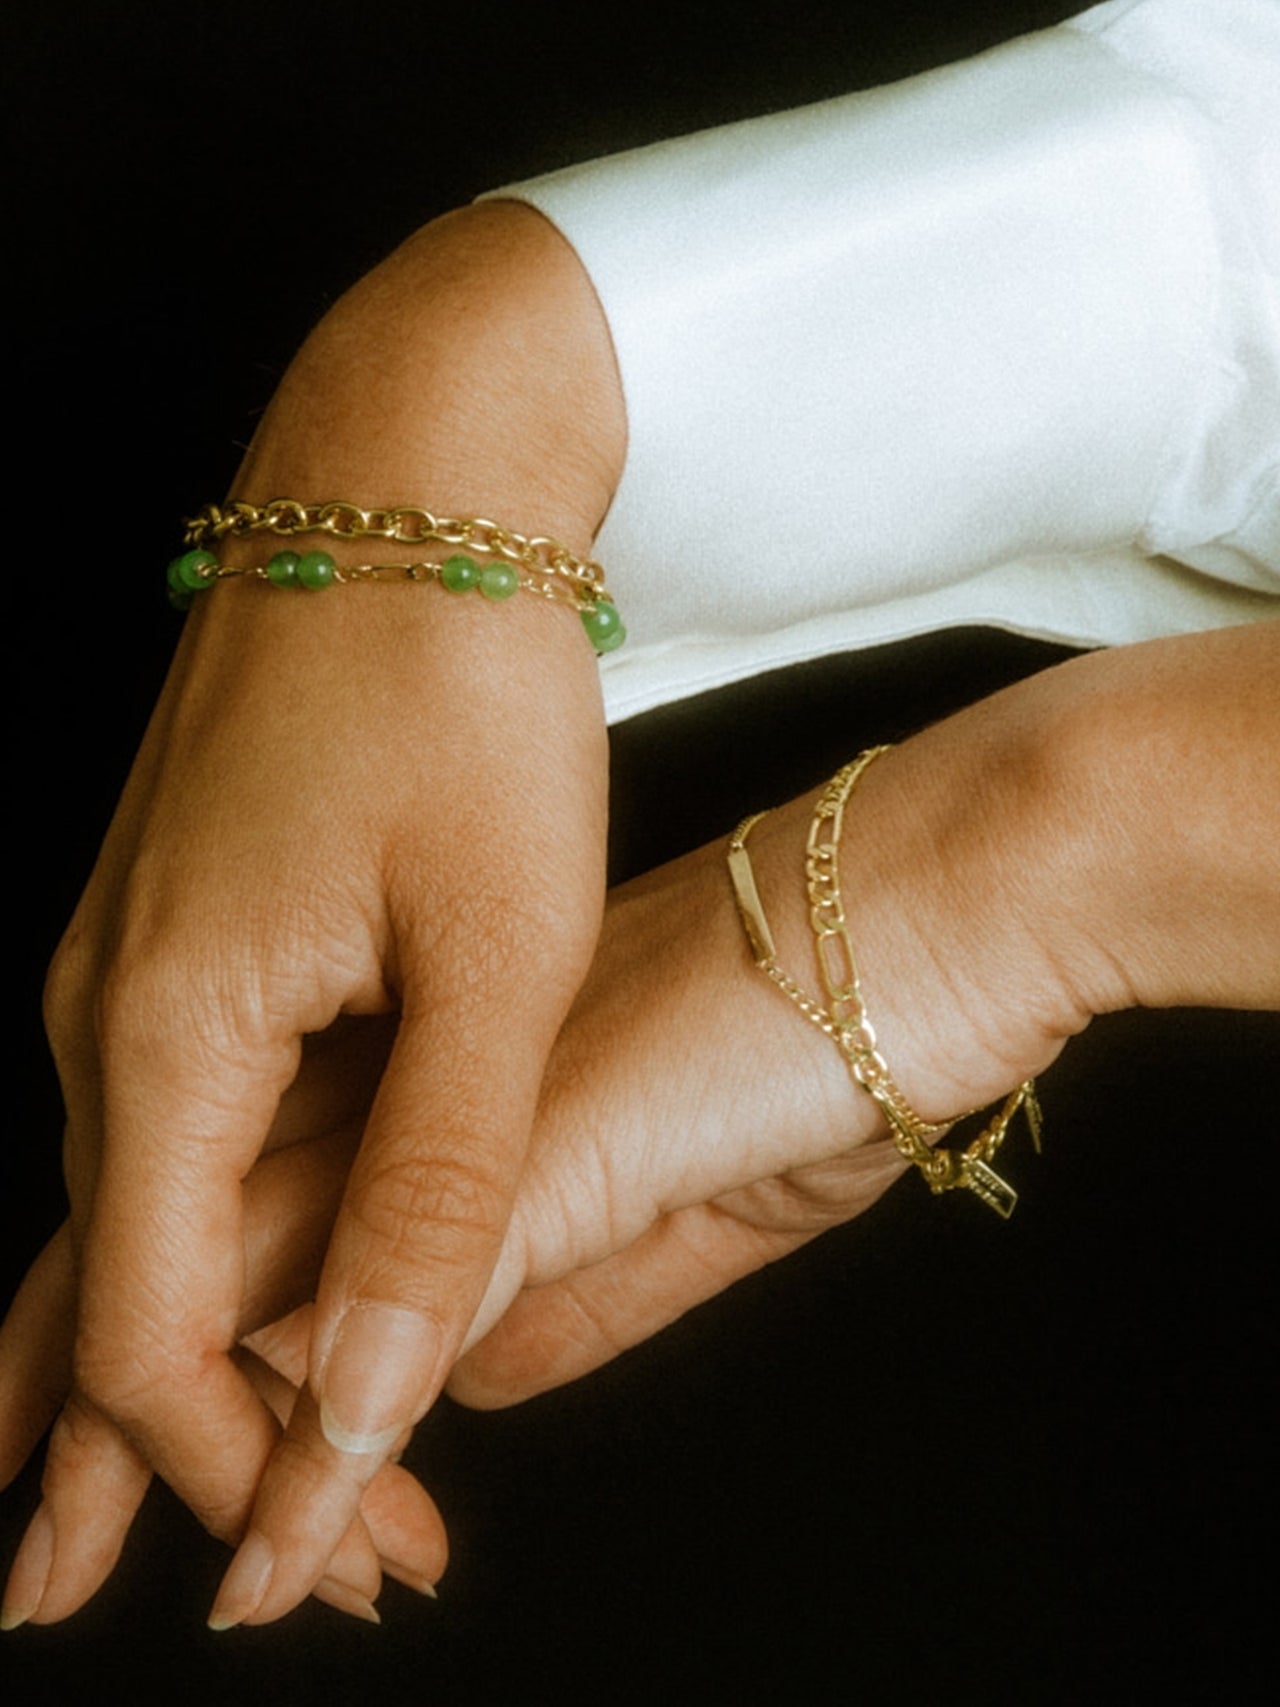 Yellow Gold XL Figaro Chain Bracelet pictured on models wrist along with three other bracelets pictured in frame. Black background. 